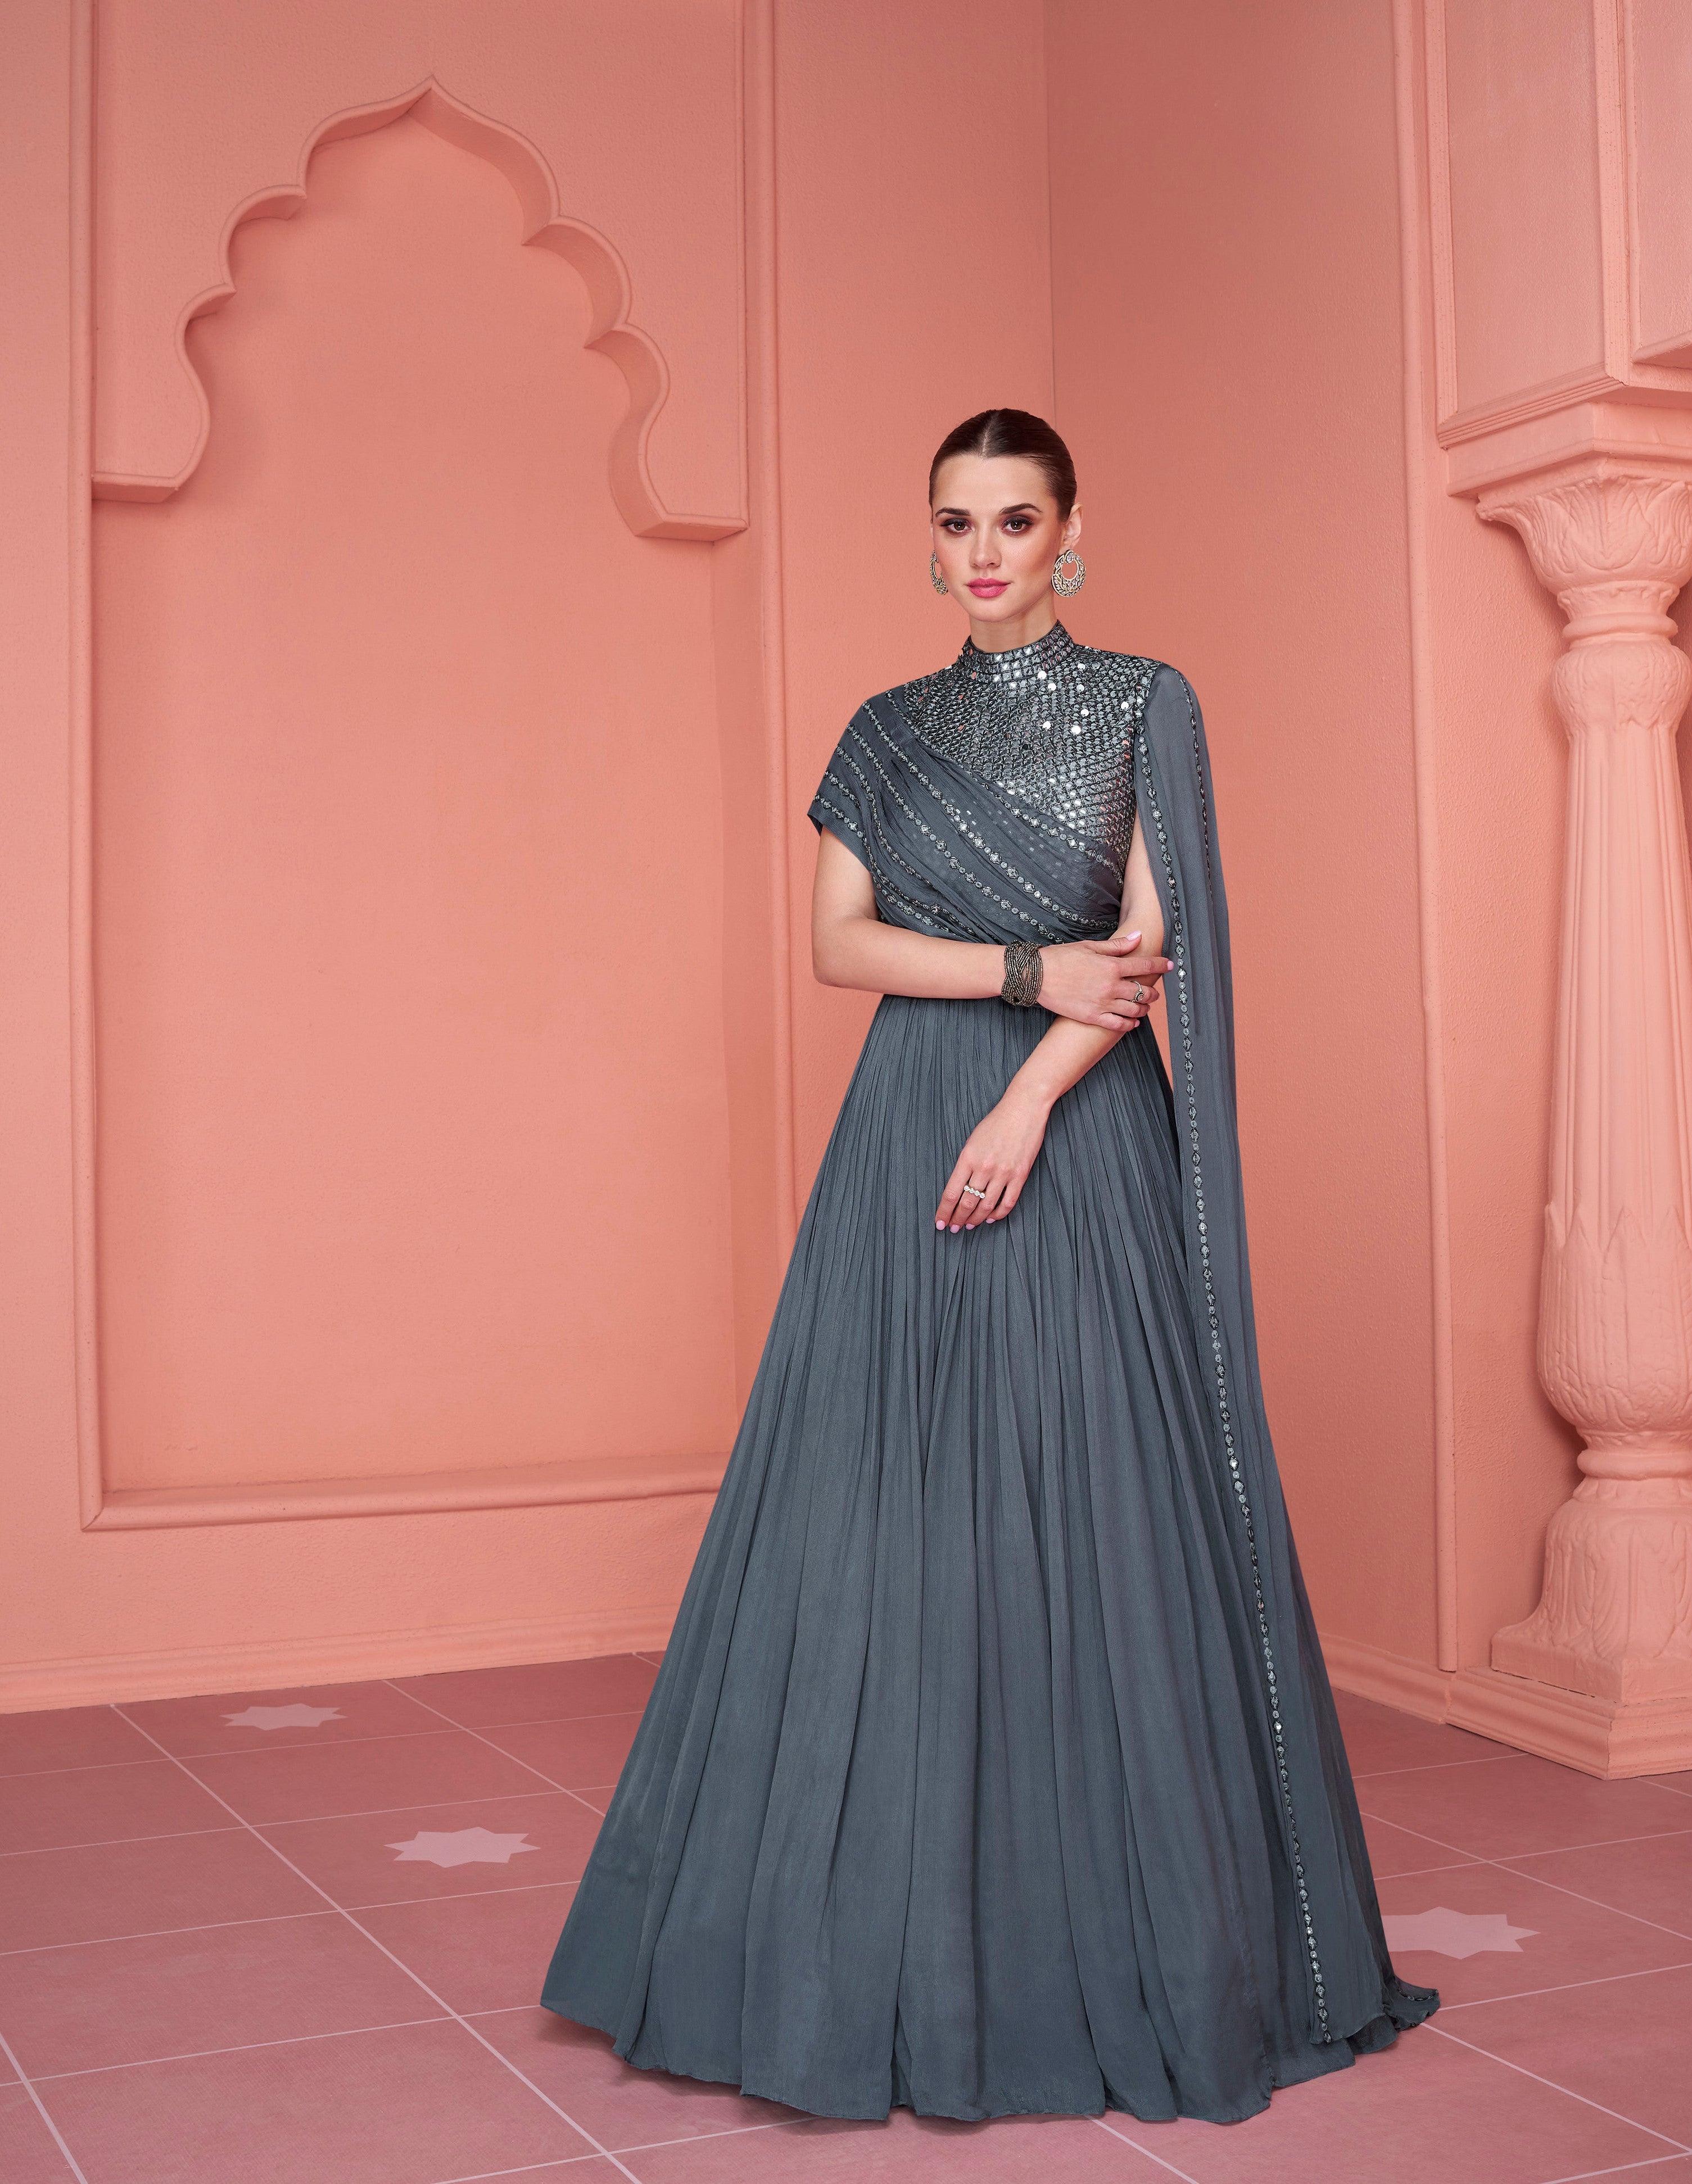 Gown . It's Indo-Western | Evening gowns, Gowns, Gowns dresses